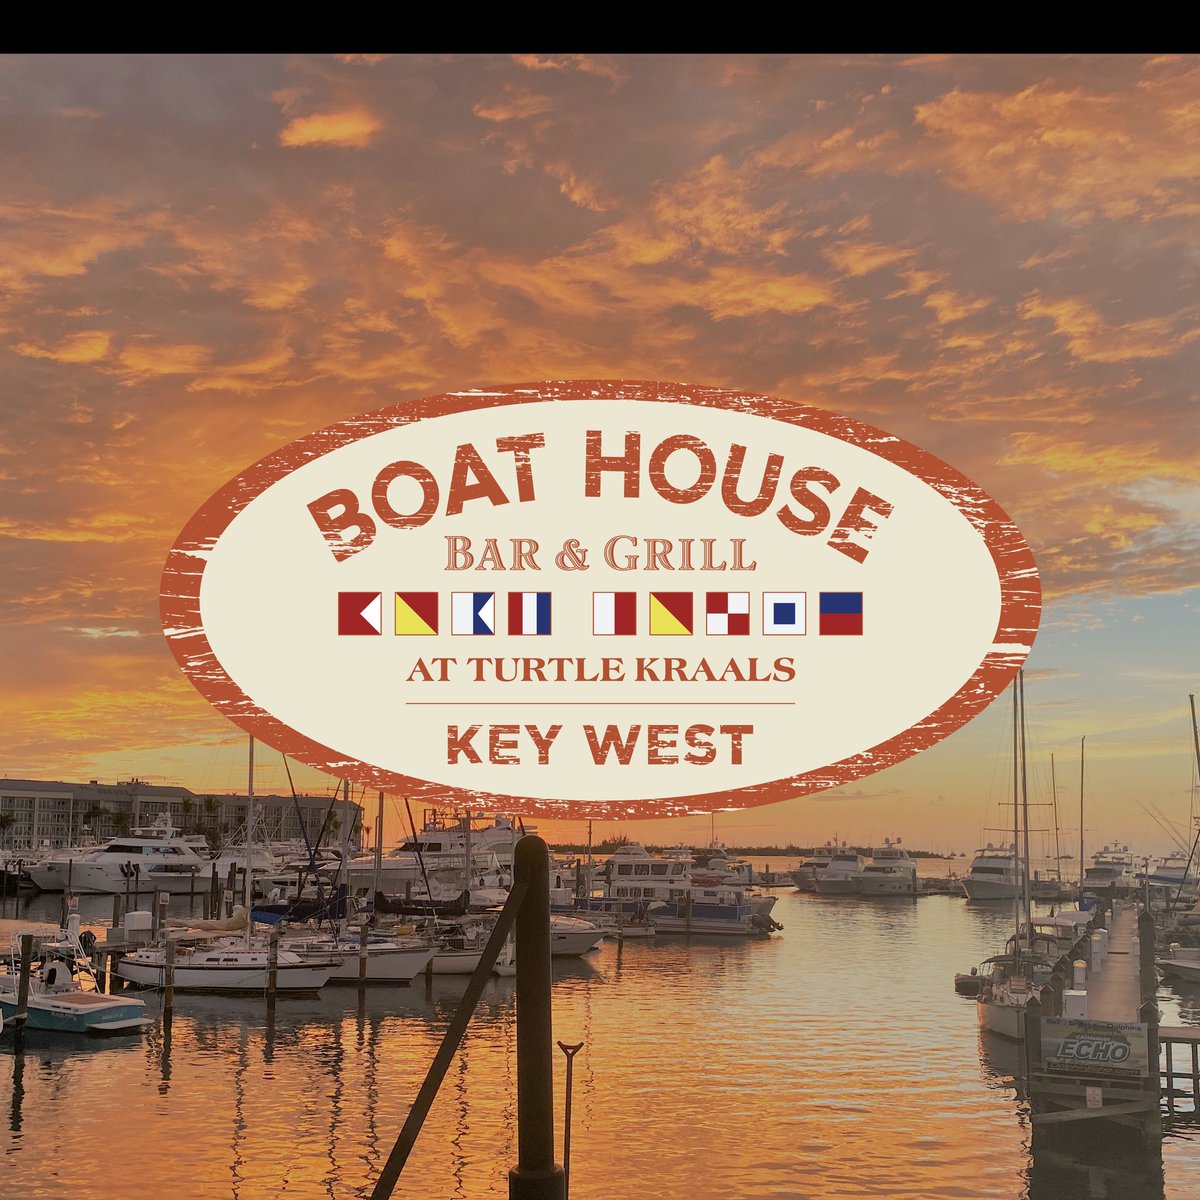 Boat House Bar & Grill's Award winning happy hour takes place from 4.00-6.30PM EVERYDAY! Enjoy this marvelous waterfront restaurant on the docks with a stunning nightly sunset. 

For reservations, please contact boathousekeywest@gmail.com ✅